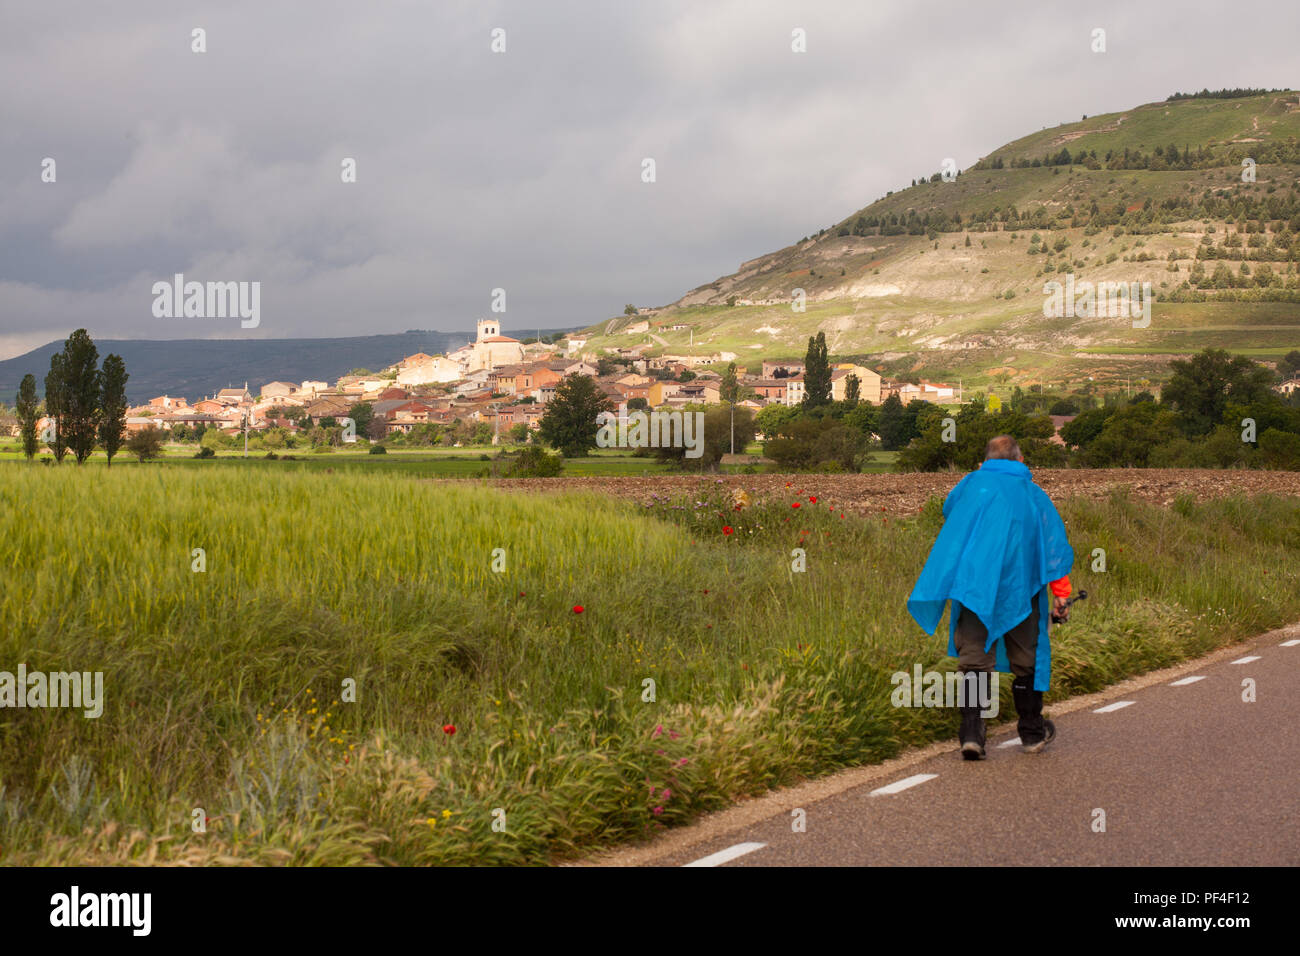 Pilgrim man a approaching  the Spanish town of Castrojeriz while walking the Camino de Santiago the way of St James pilgrimage route Spain Stock Photo